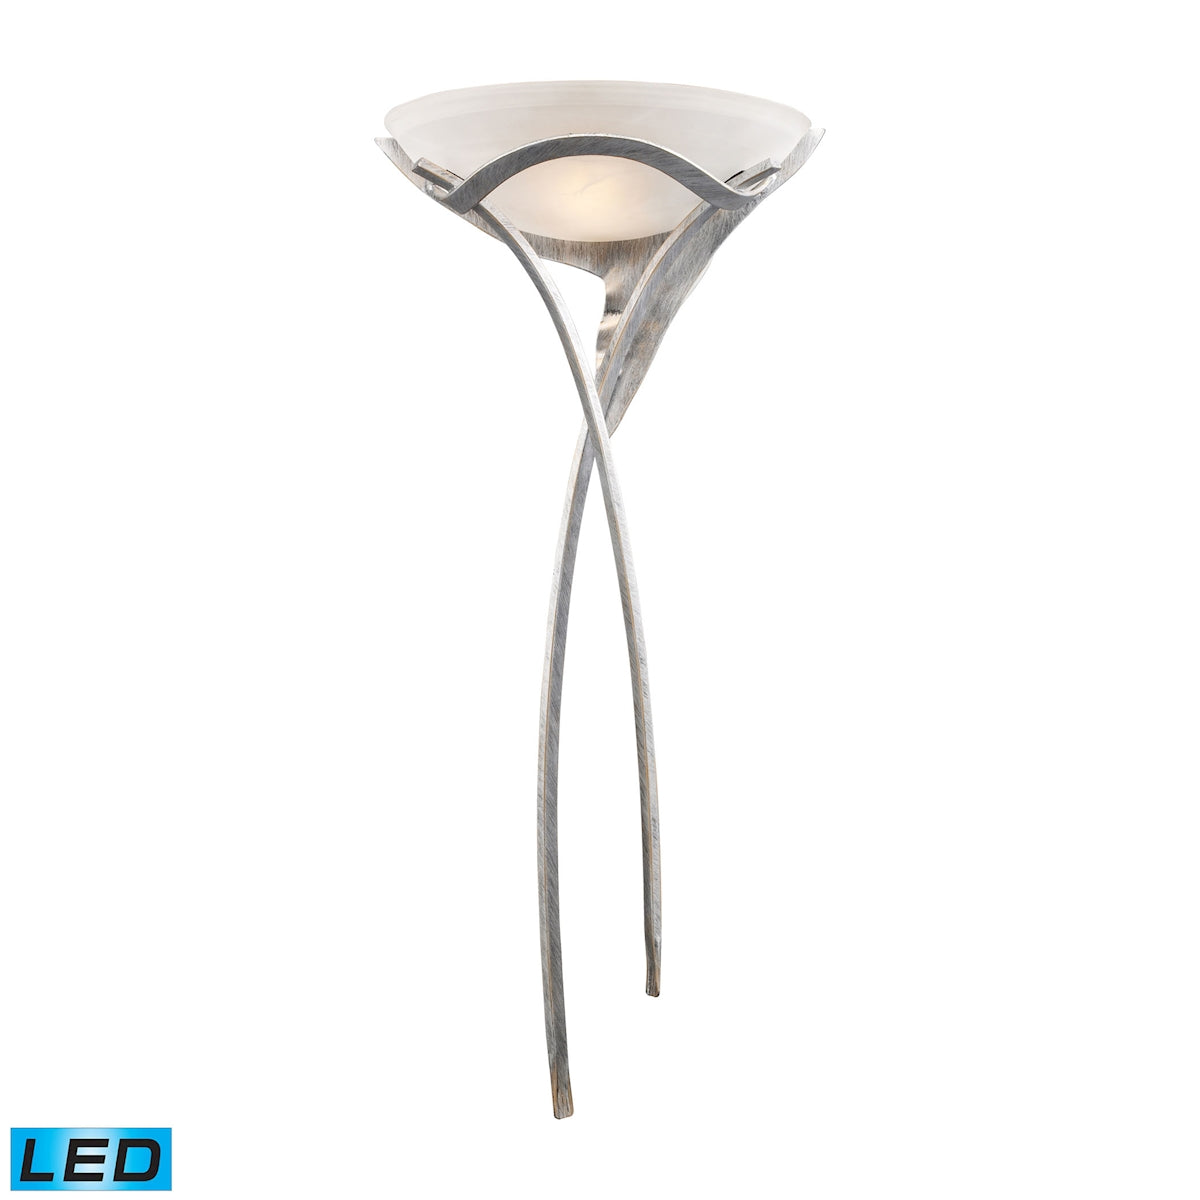 ELK Lighting 002-TS-LED - Aurora 16" Wide 1-Light Sconce in Tarnished Silver with White Faux-Alabast